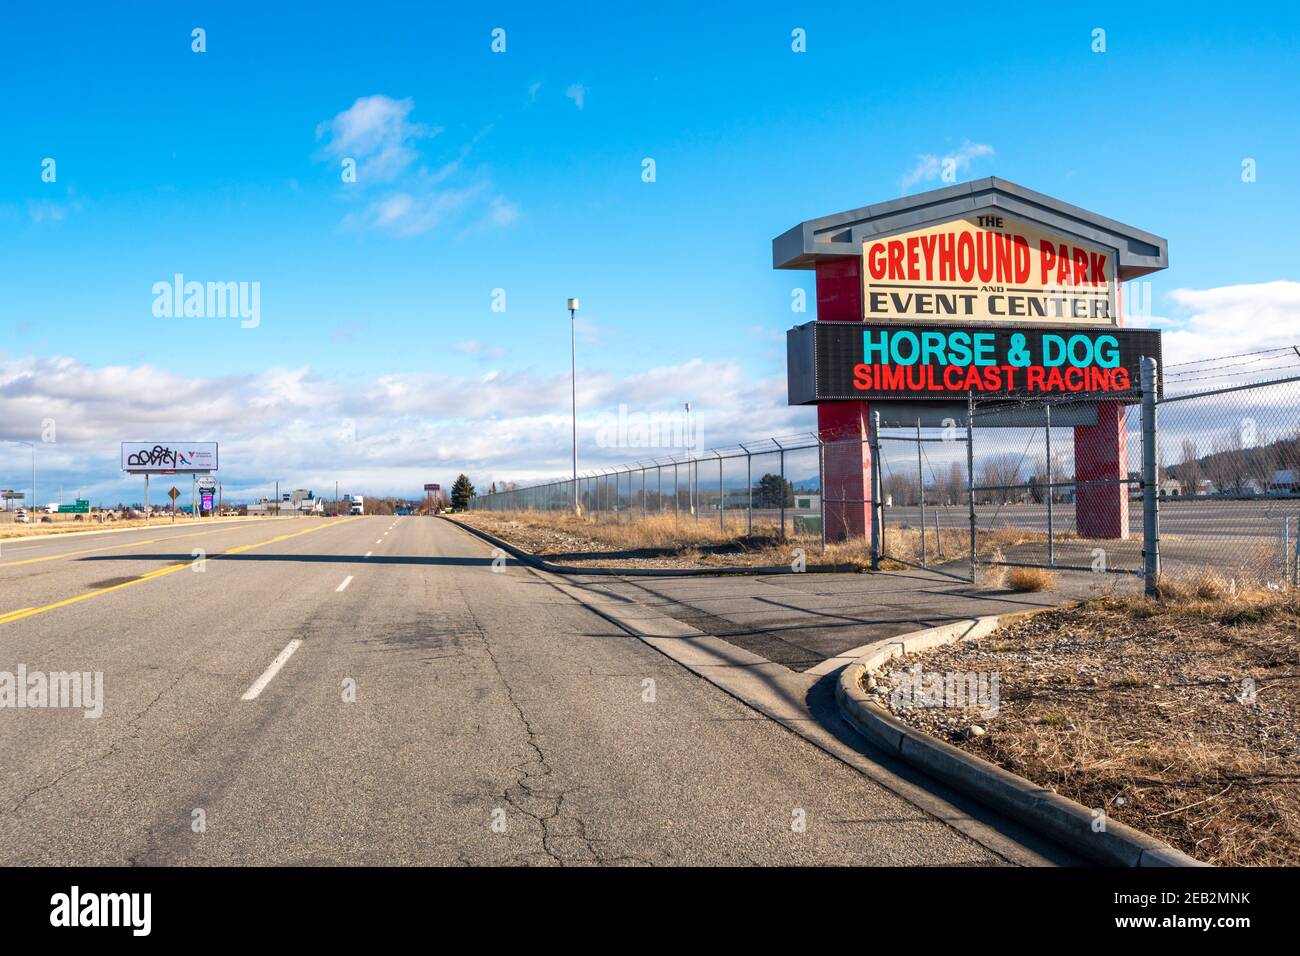 The sign and entrance to the Greyhound Park Event Center featuring off-track closed circuit horse and dog races in Post Falls, Idaho USA Stock Photo